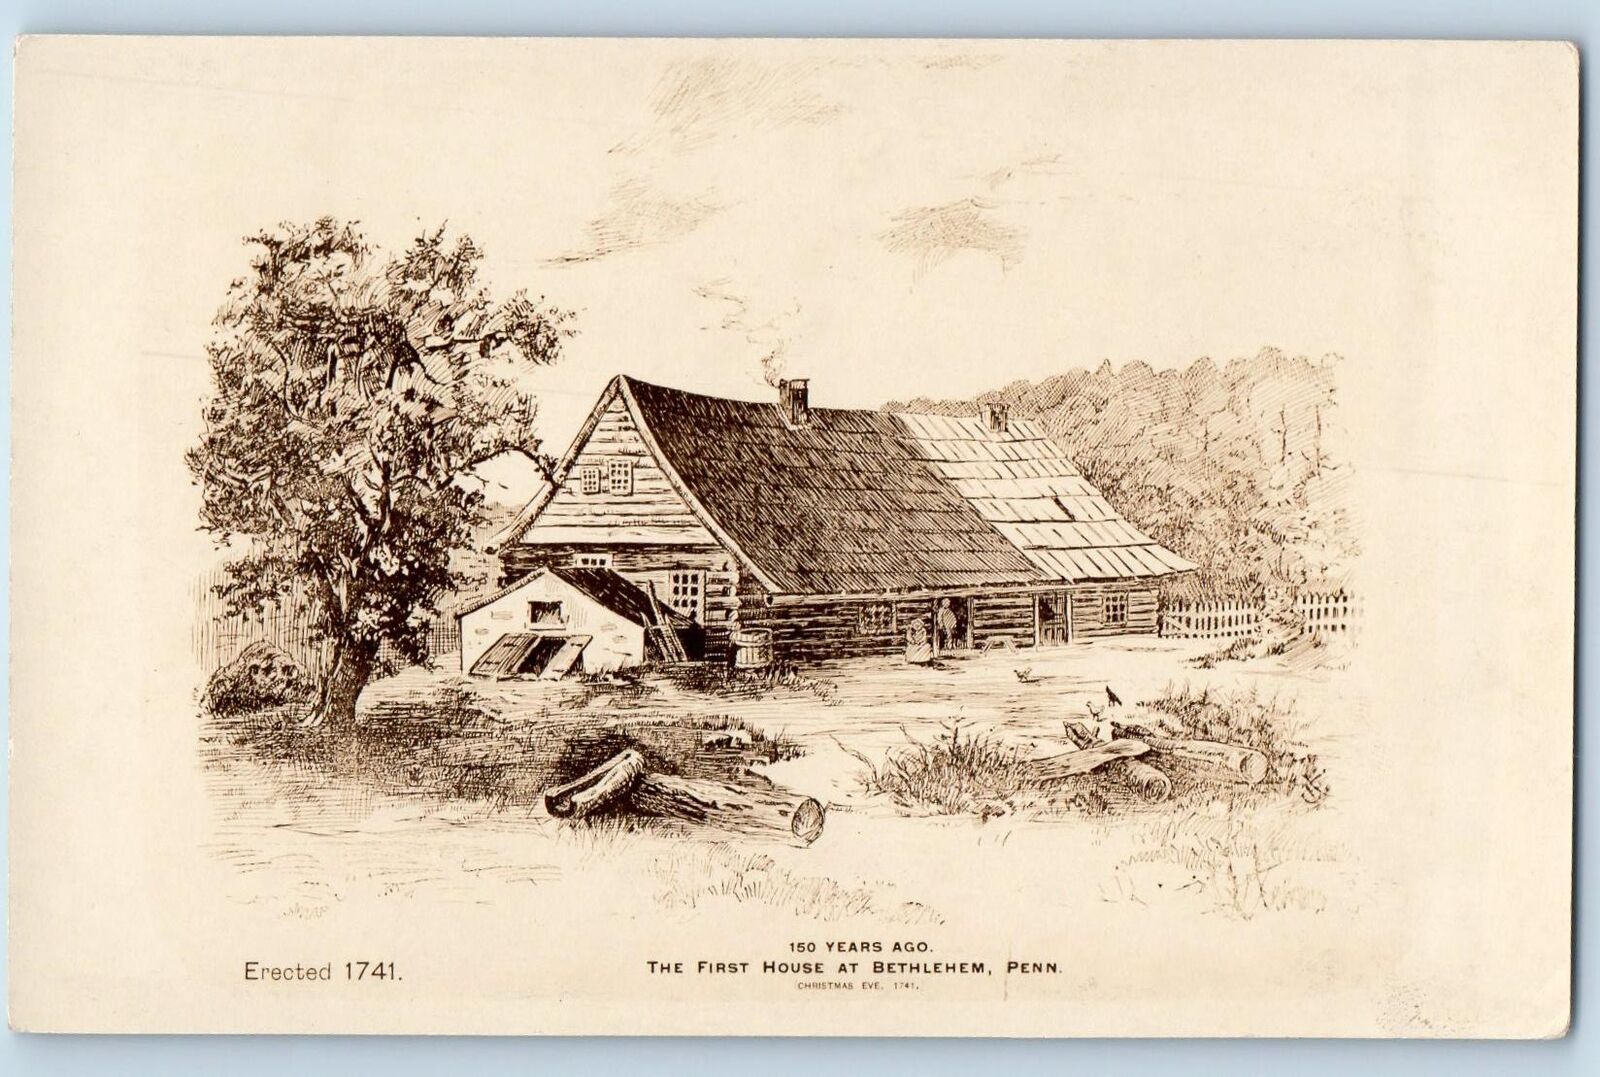 Buck Hills Falls Pennsylvania PA Postcard 150 Years Ago The First House c1940's